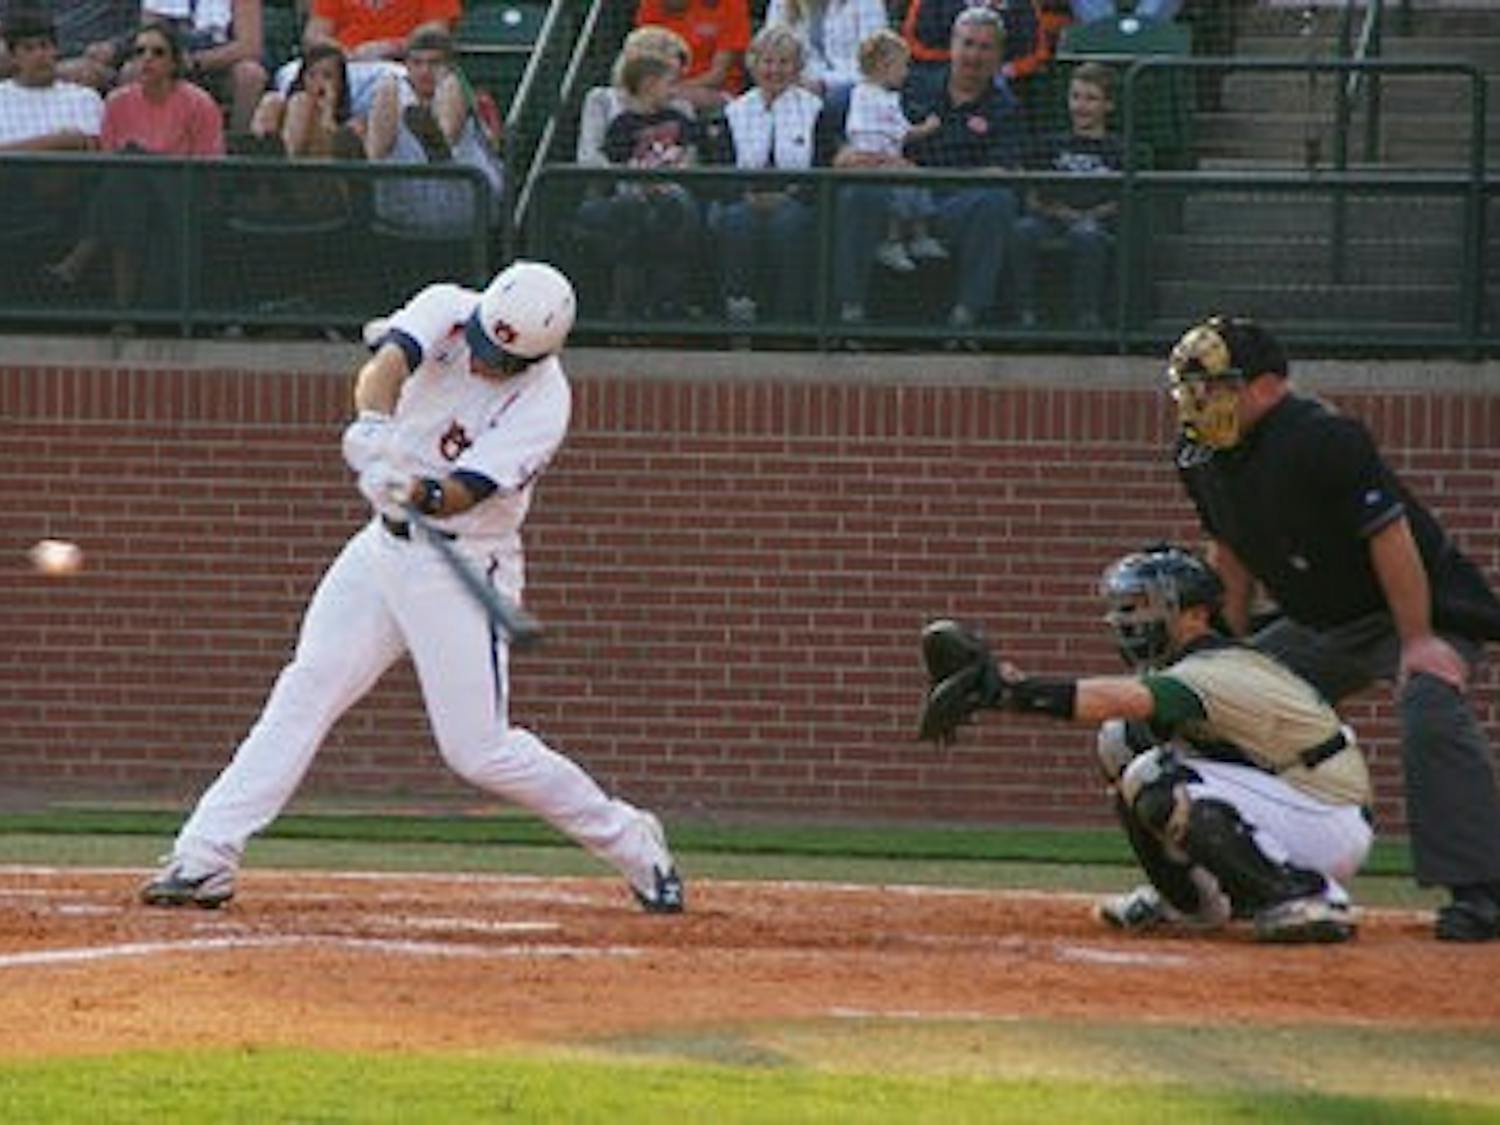 An Auburn player lines up for a hit against UAB. This weekend's tournament had one of the highest attendance rates. (Rebekah Weaver / Assistant Photo Editor)